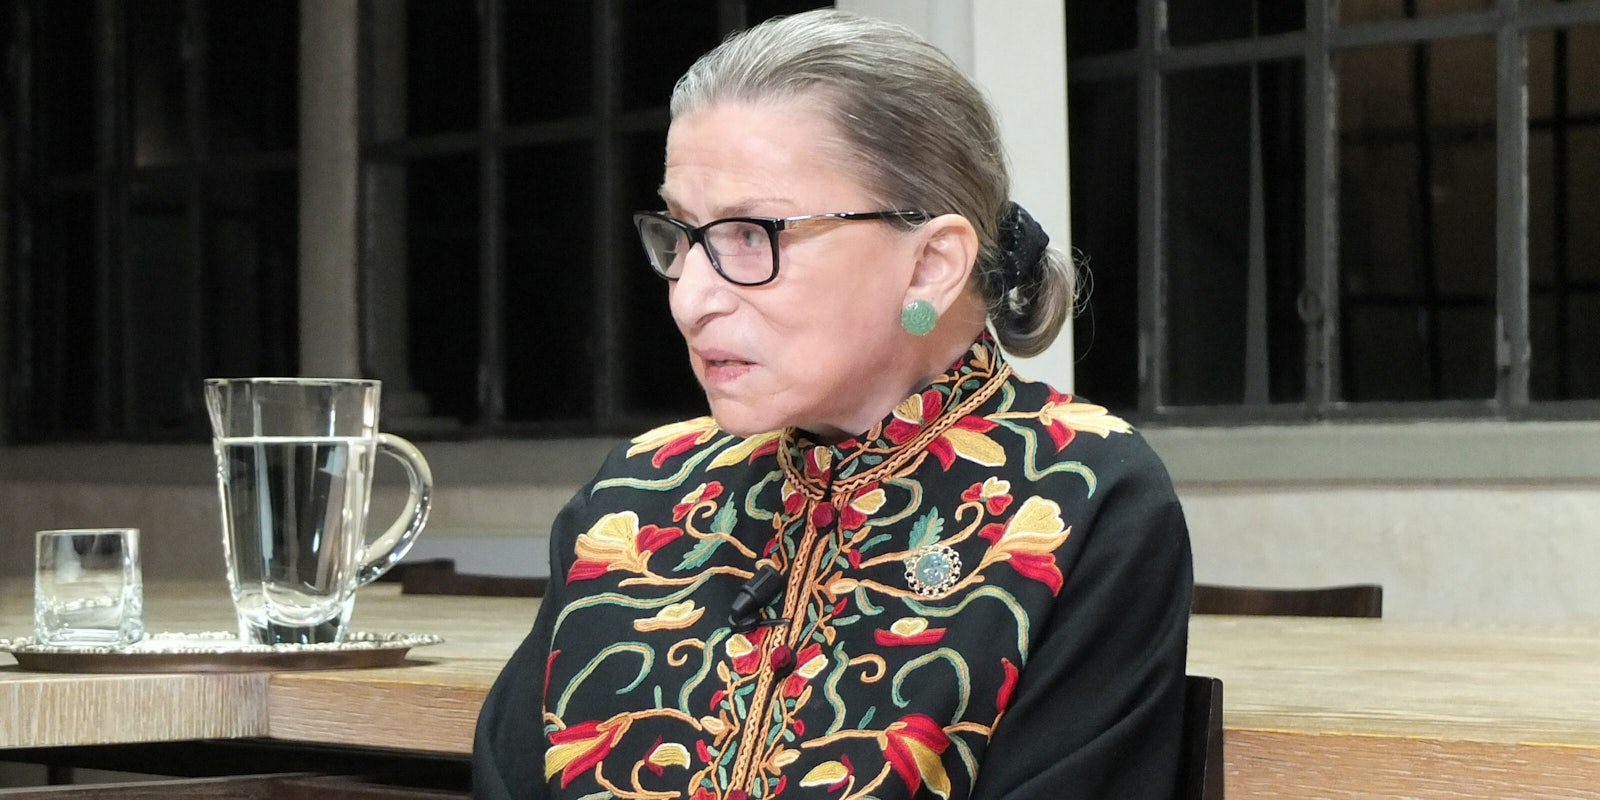 Justice Ginsburg shared her experiences with sexual harassment and expressed support for #MeToo over the weekend.